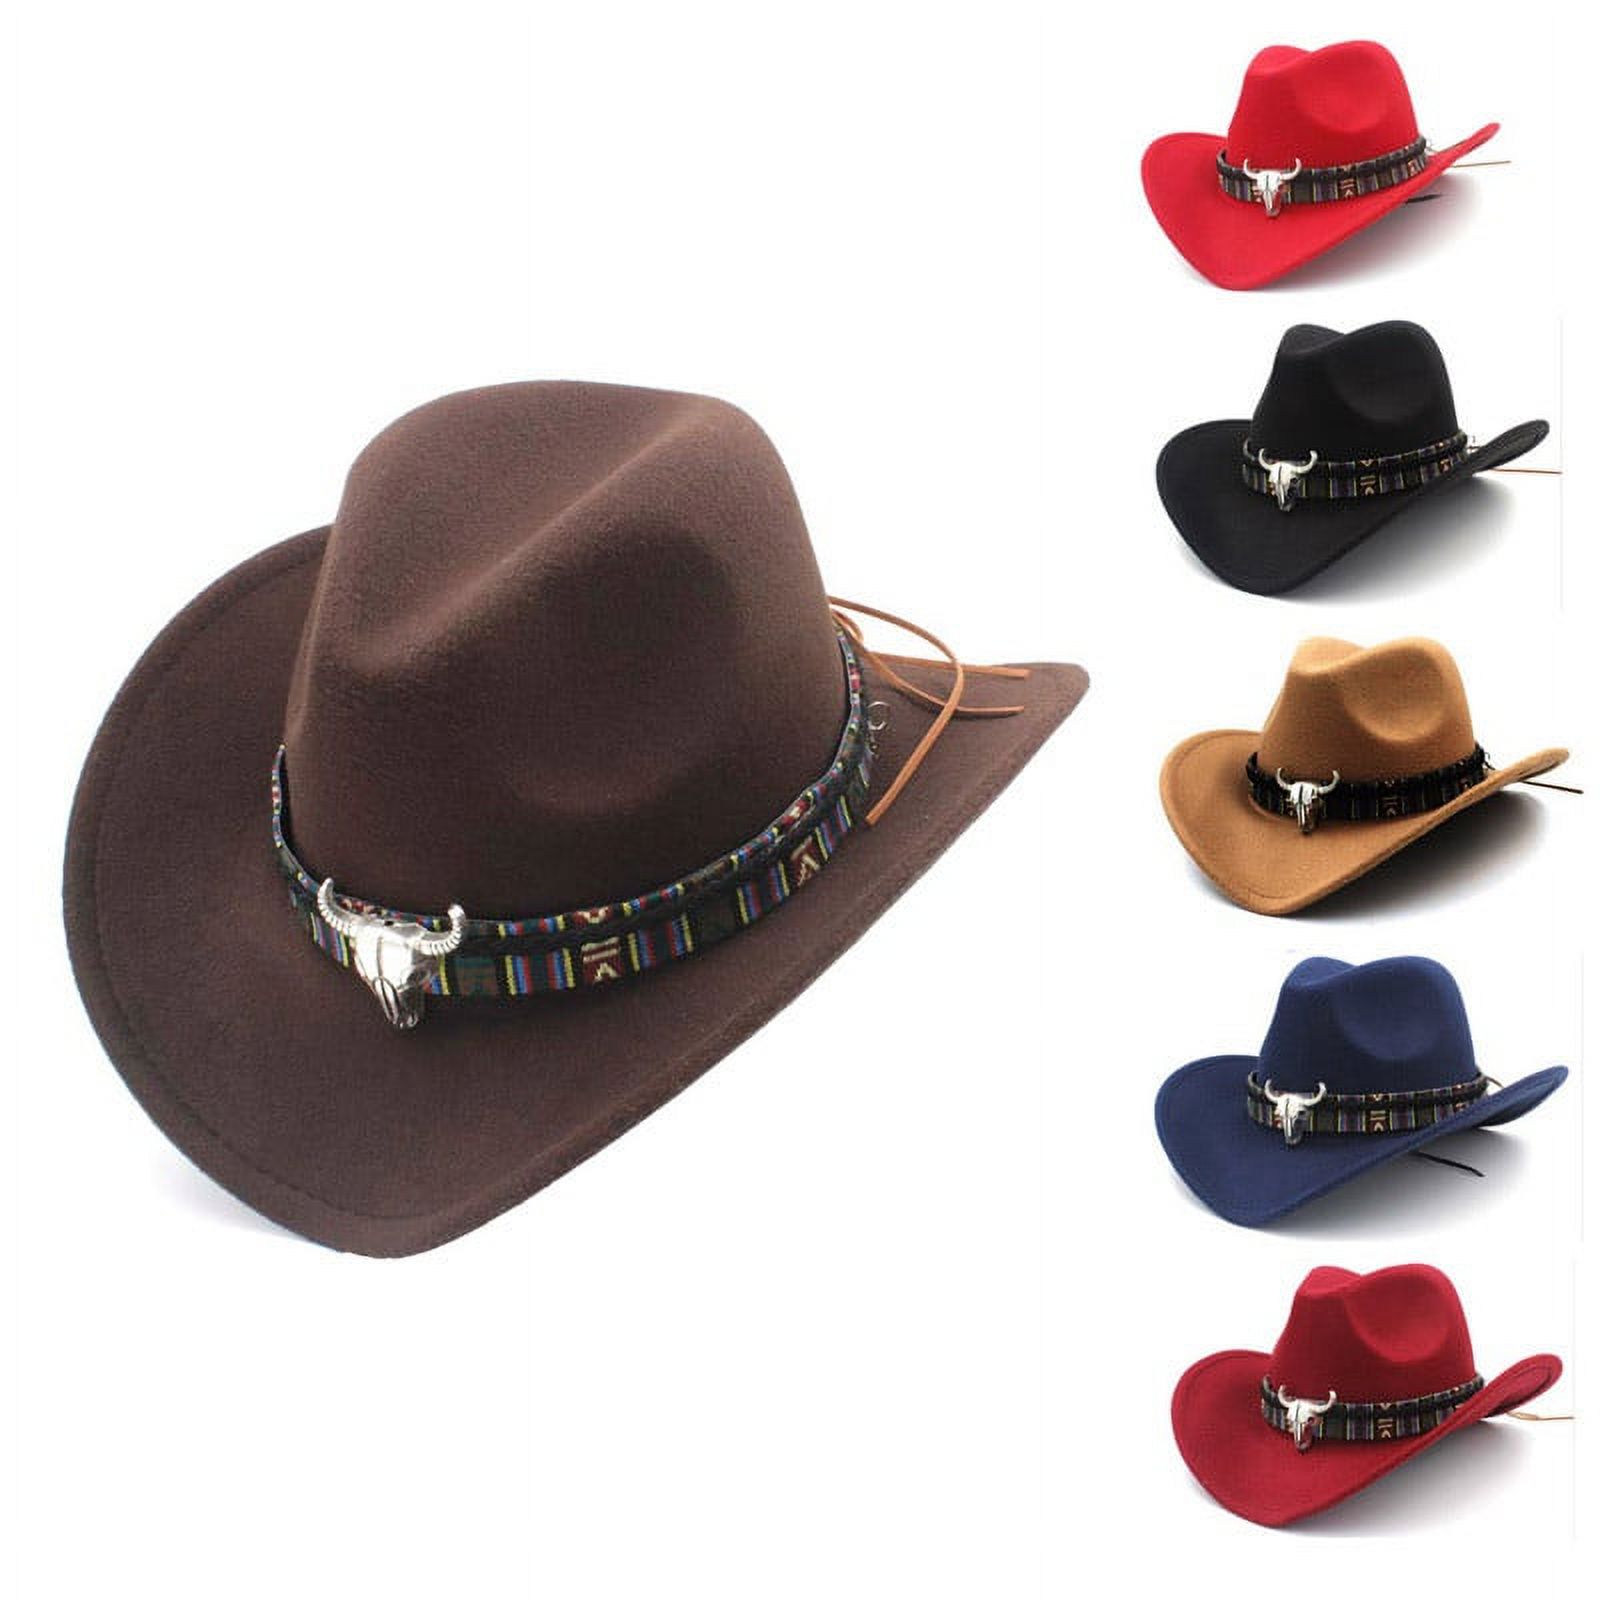 Outdoor Casual Fashion Personality hat Summer Spring Autumn Winter Wool Hat Women Men Ethnic Style Western Cowboy Hat for Lady Tassel Felt Cowgirl Sombrero Caps Travel Sun Hat Wild hat - image 1 of 8